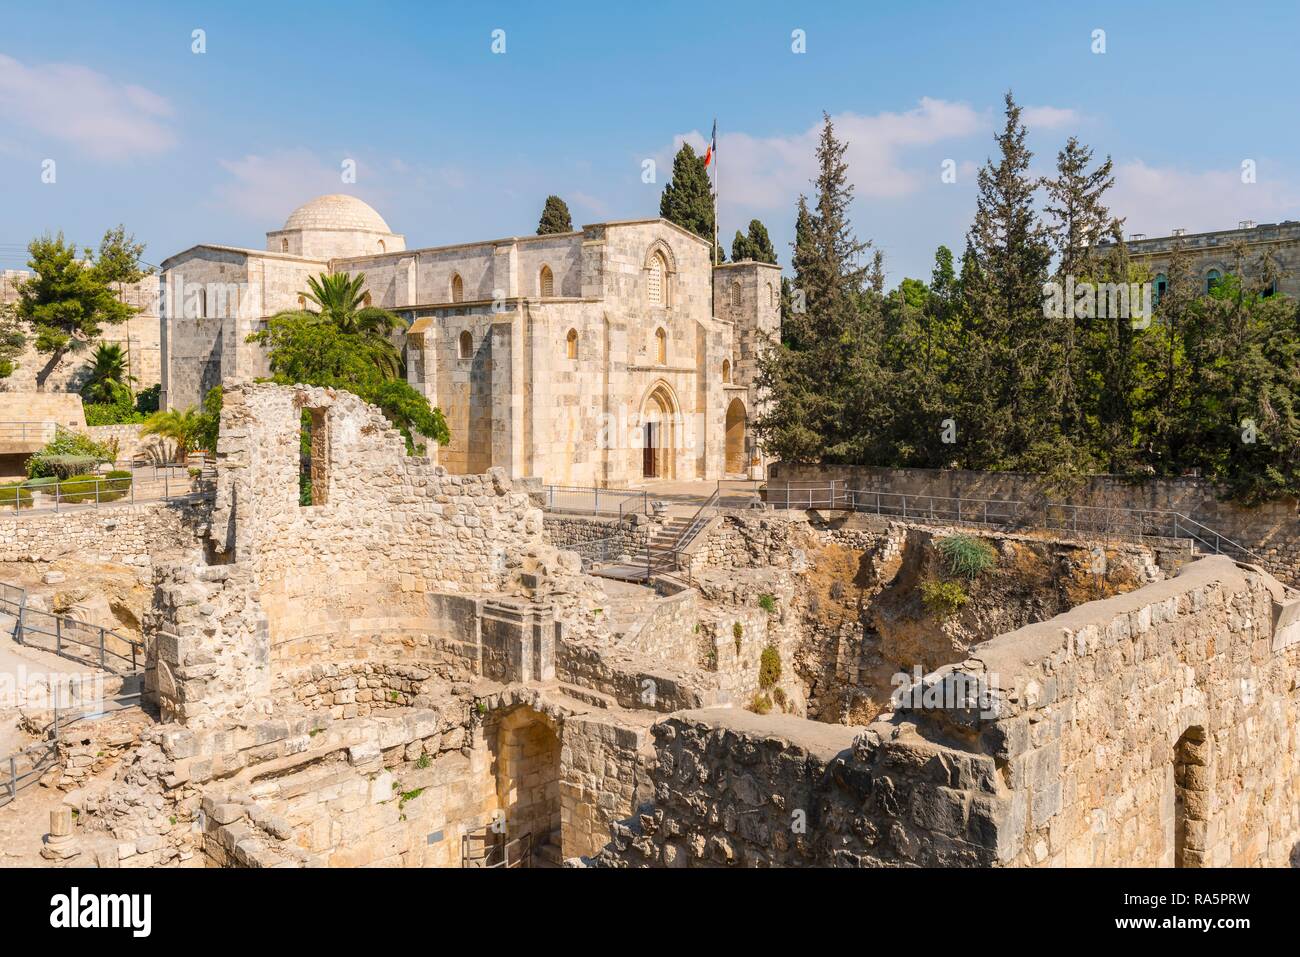 Roman ruins in front of the Romanesque St. Anne's Church, 12th century, Old Town, Jerusalem, Israel Stock Photo